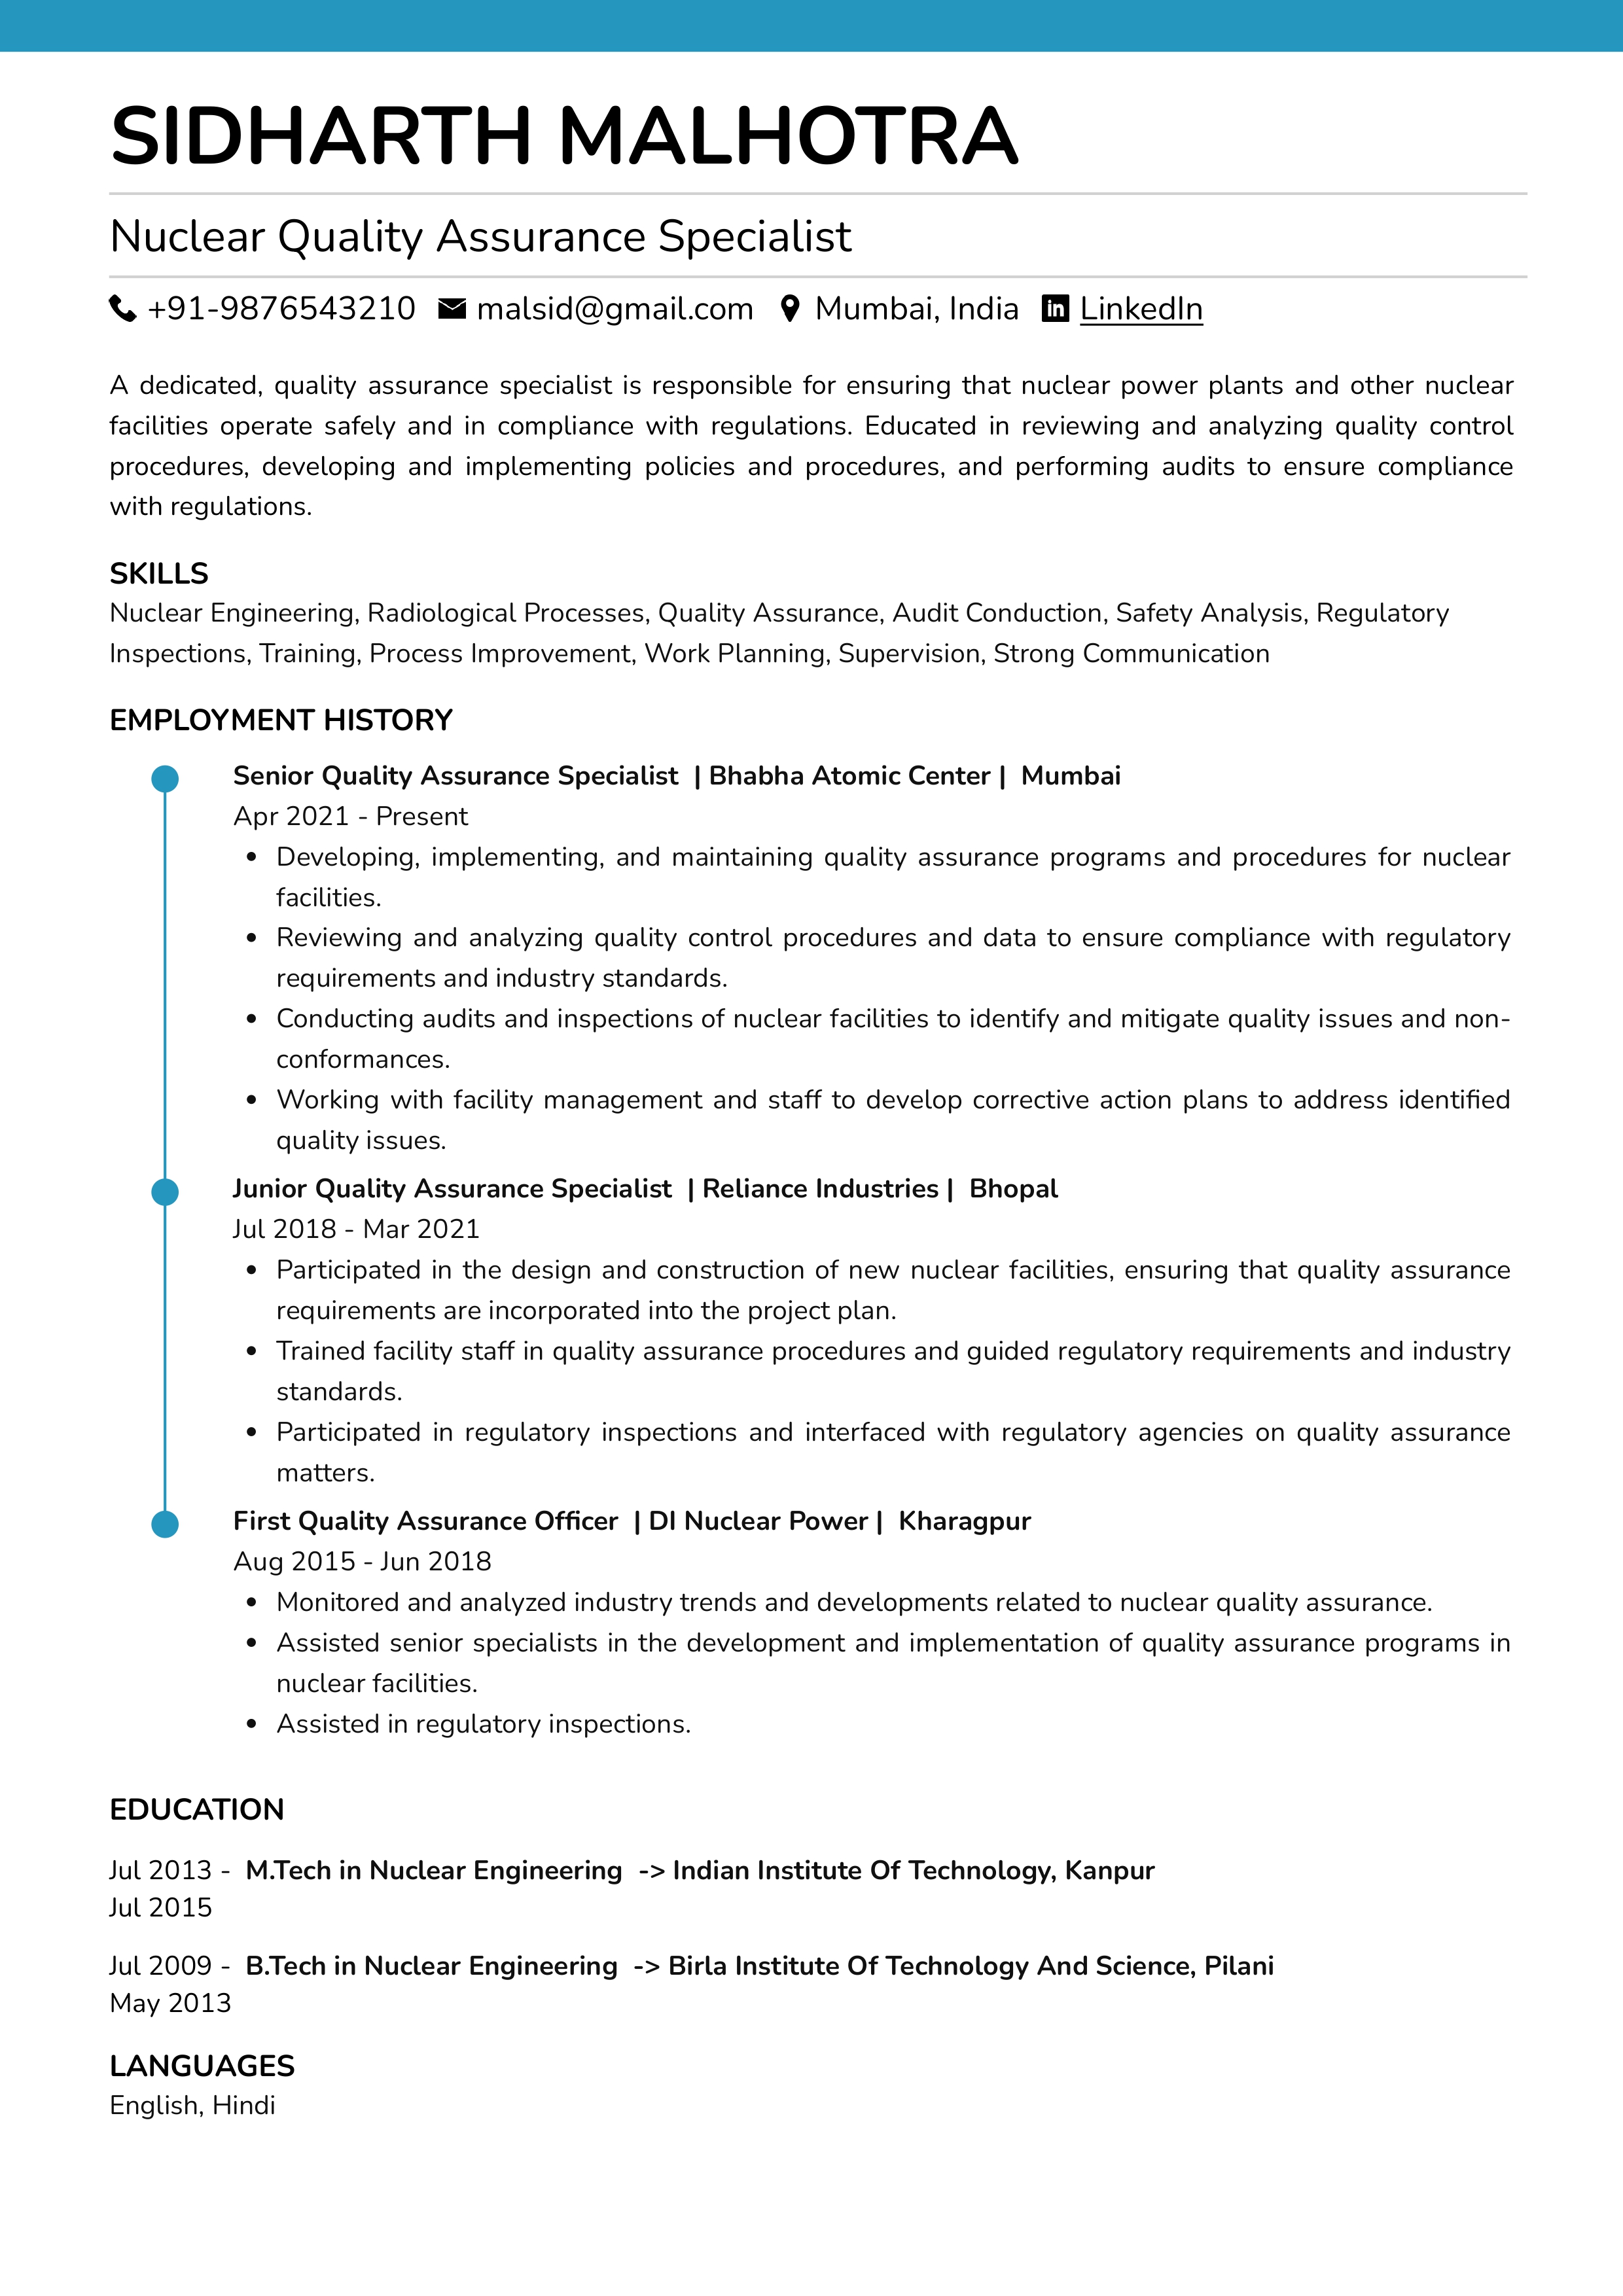 Sample Resume of Nuclear Quality Assurance Specialist | Free Resume Templates & Samples on Resumod.co